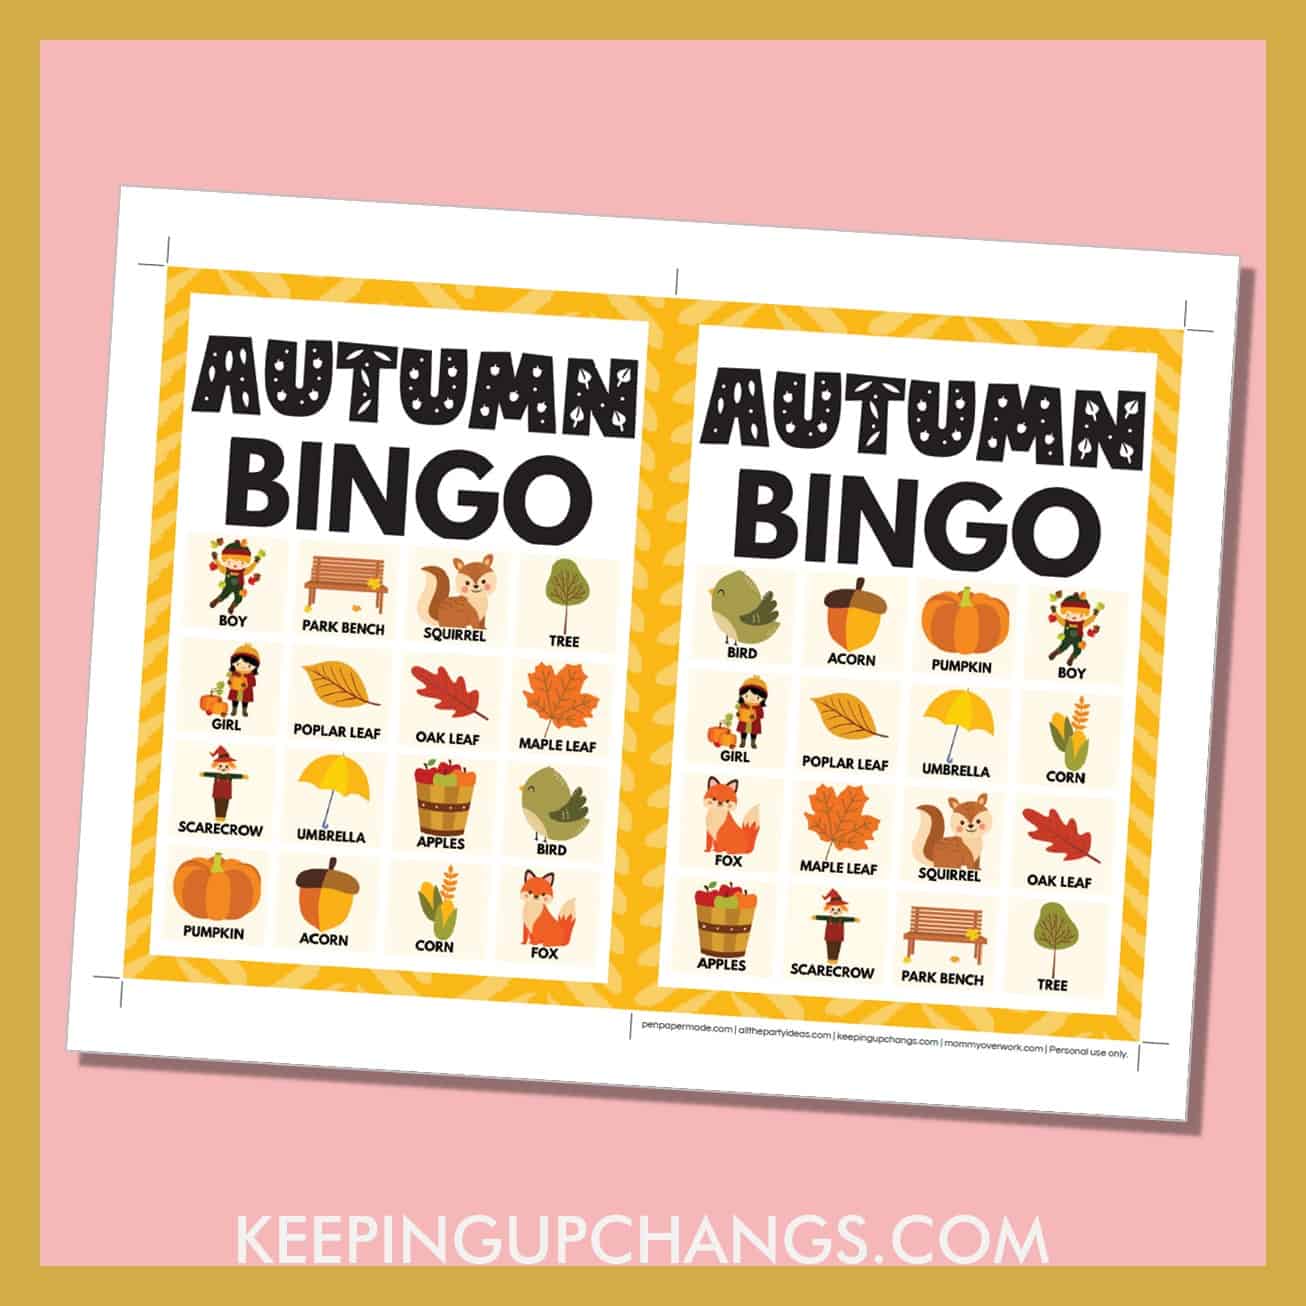 free fall autumn bingo card 4x4 5x7 game boards with images and text words.